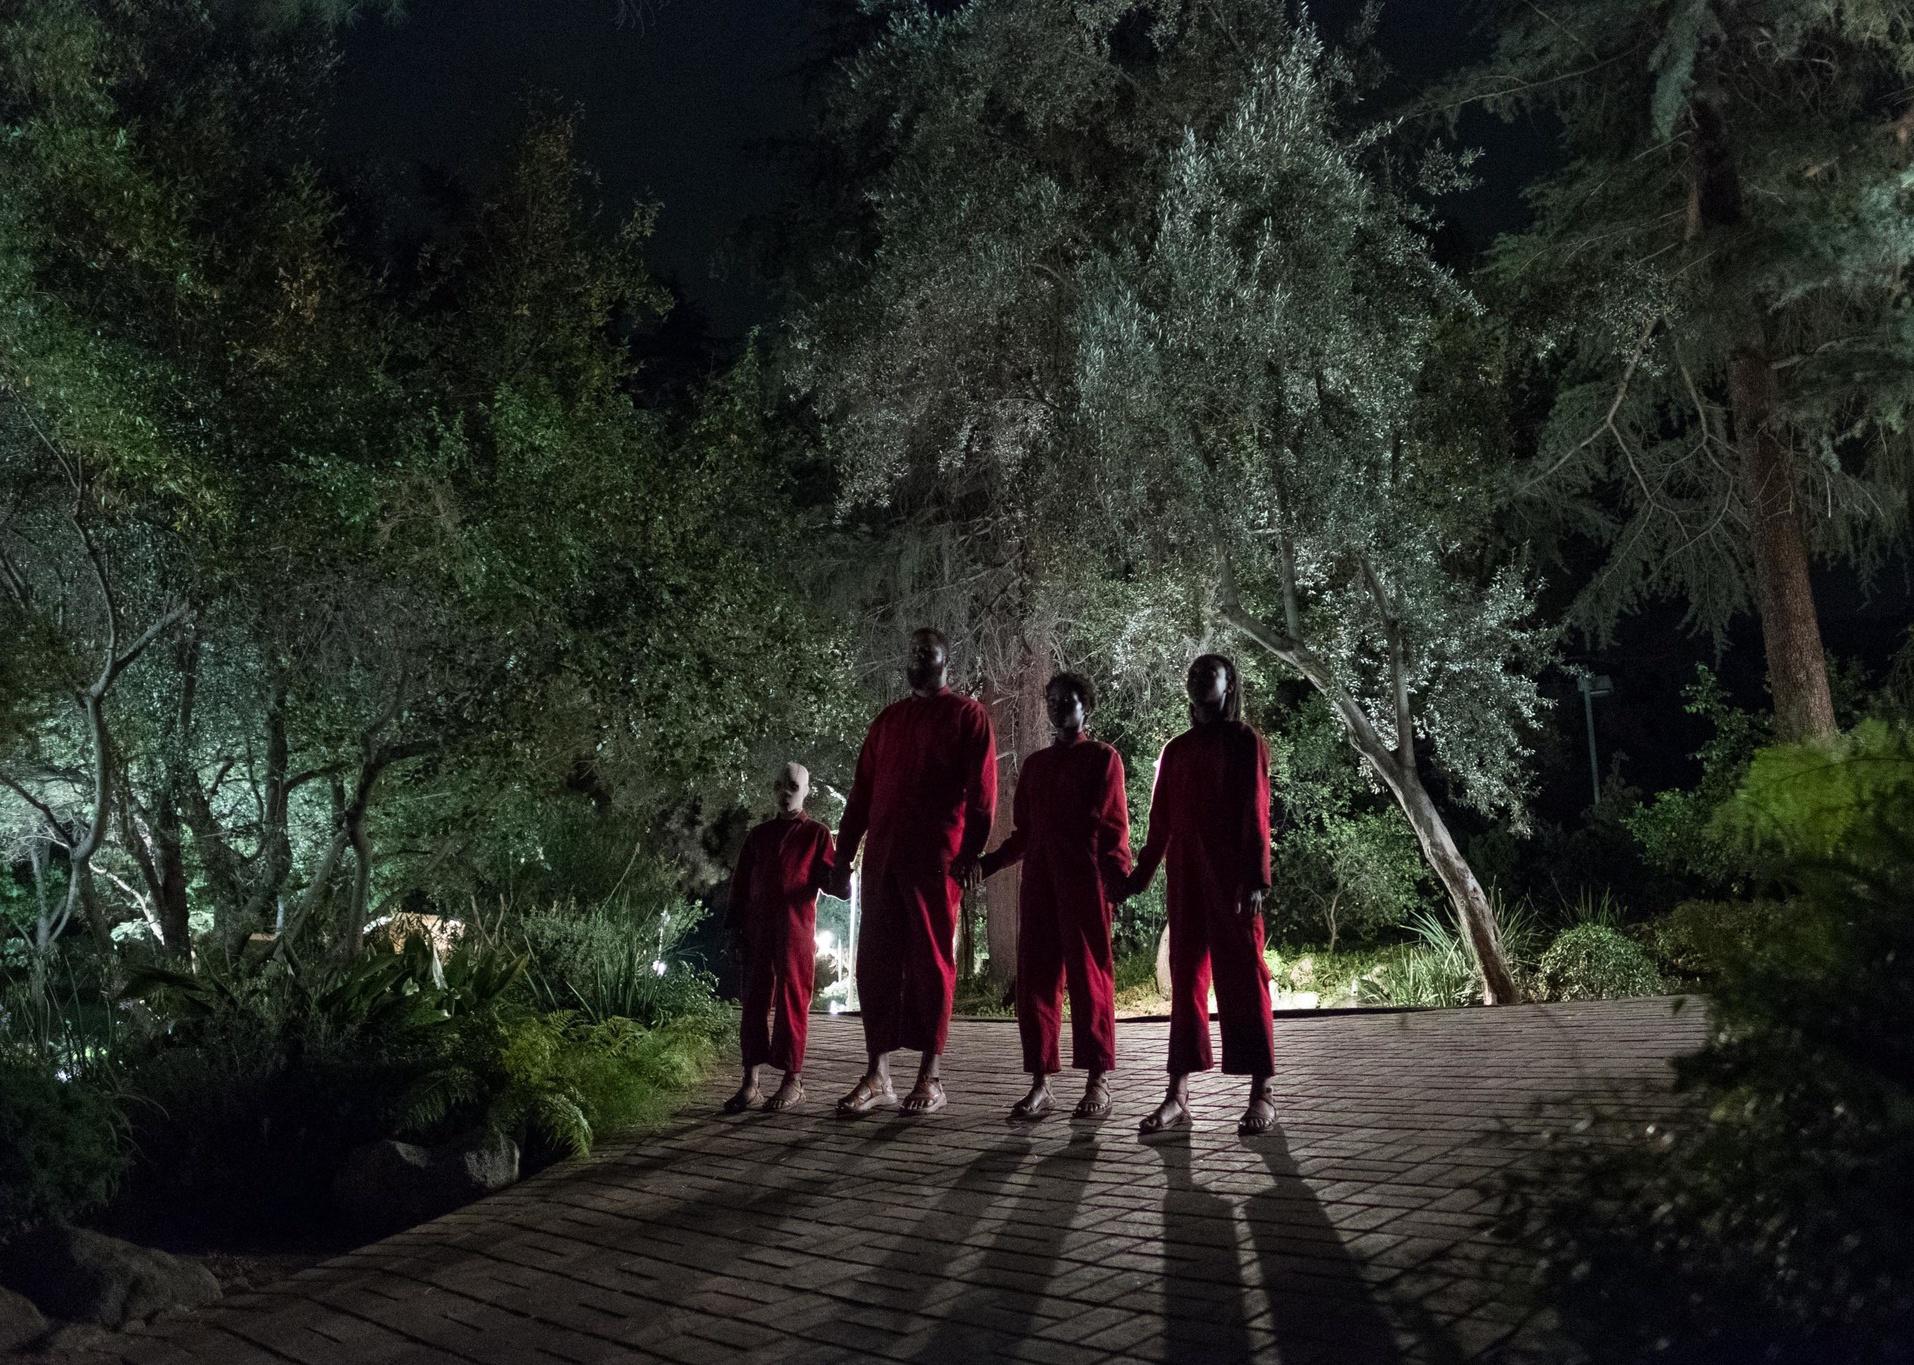 An older man and three young people stand holding hands wearing red jumpsuits in the dark.